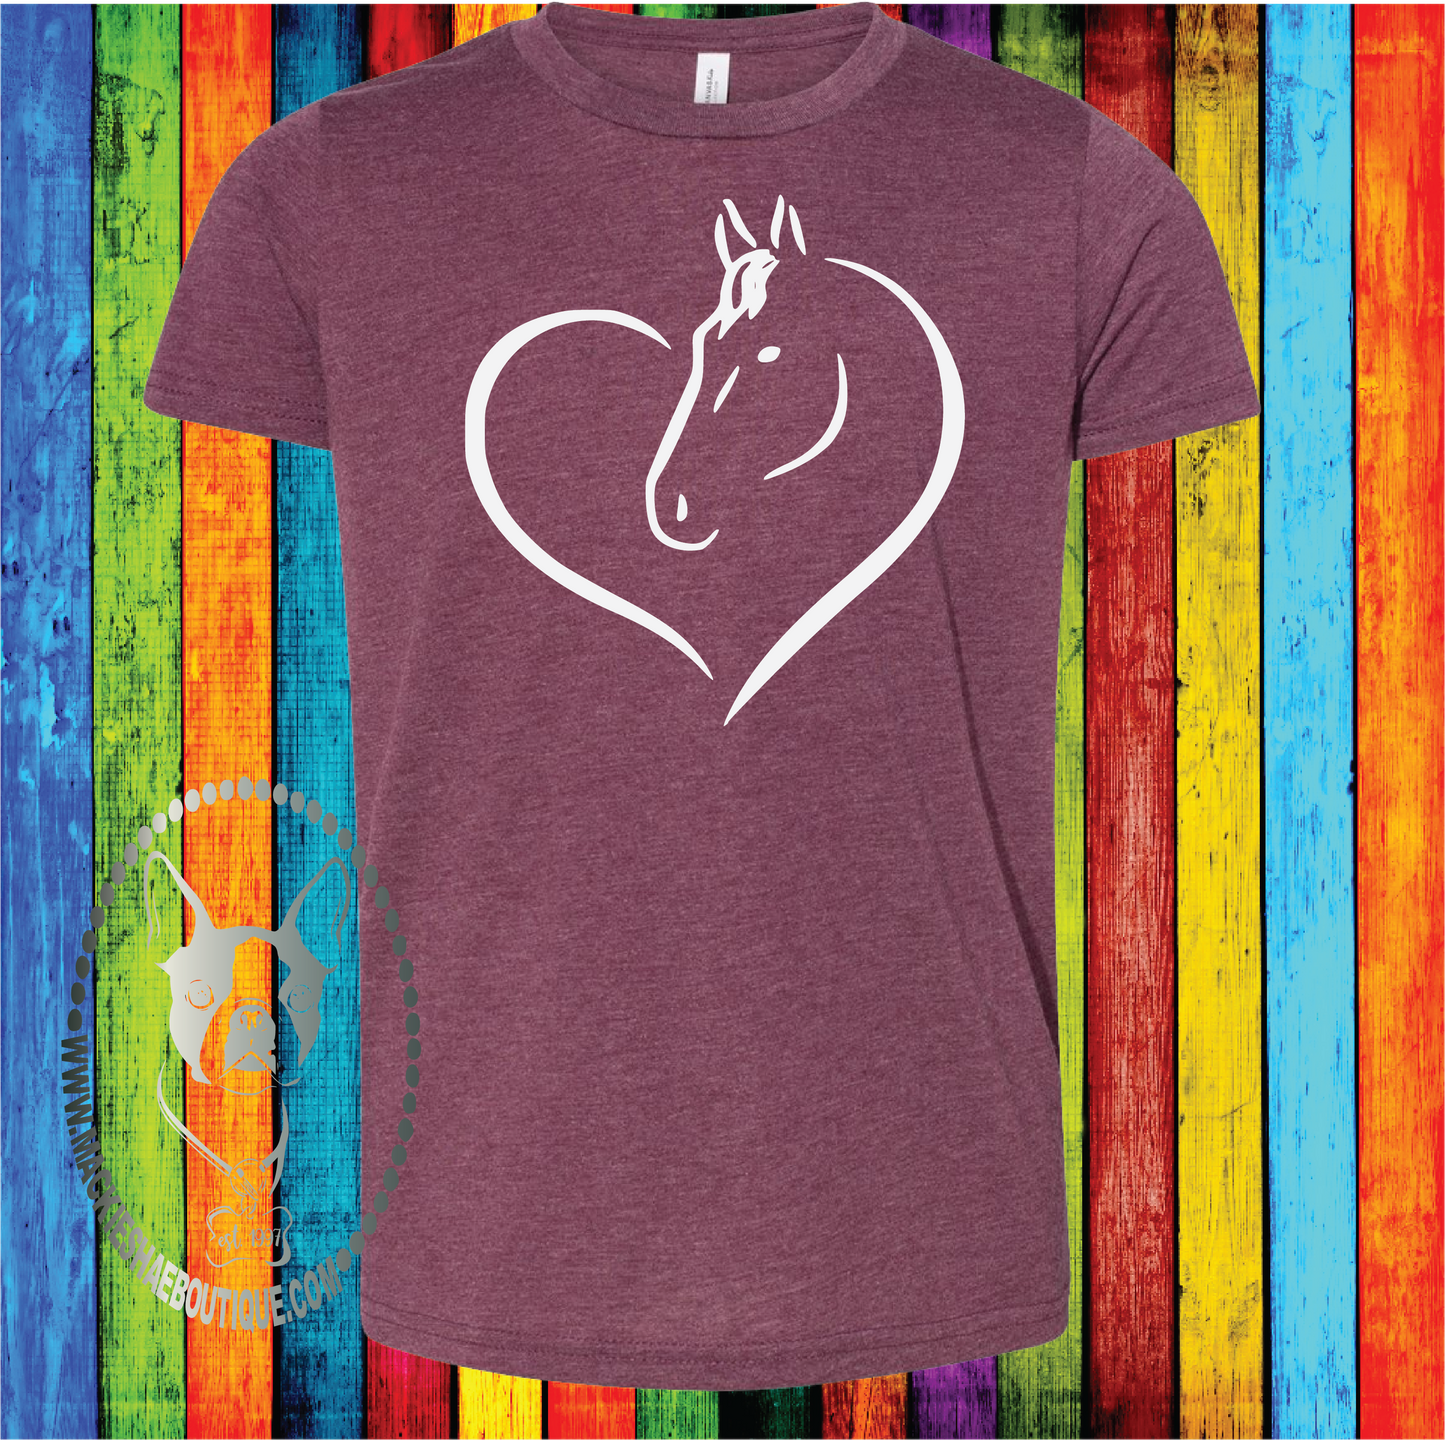 Horse Heart Custom Shirt for Kids and Adults, Soft Short Sleeve